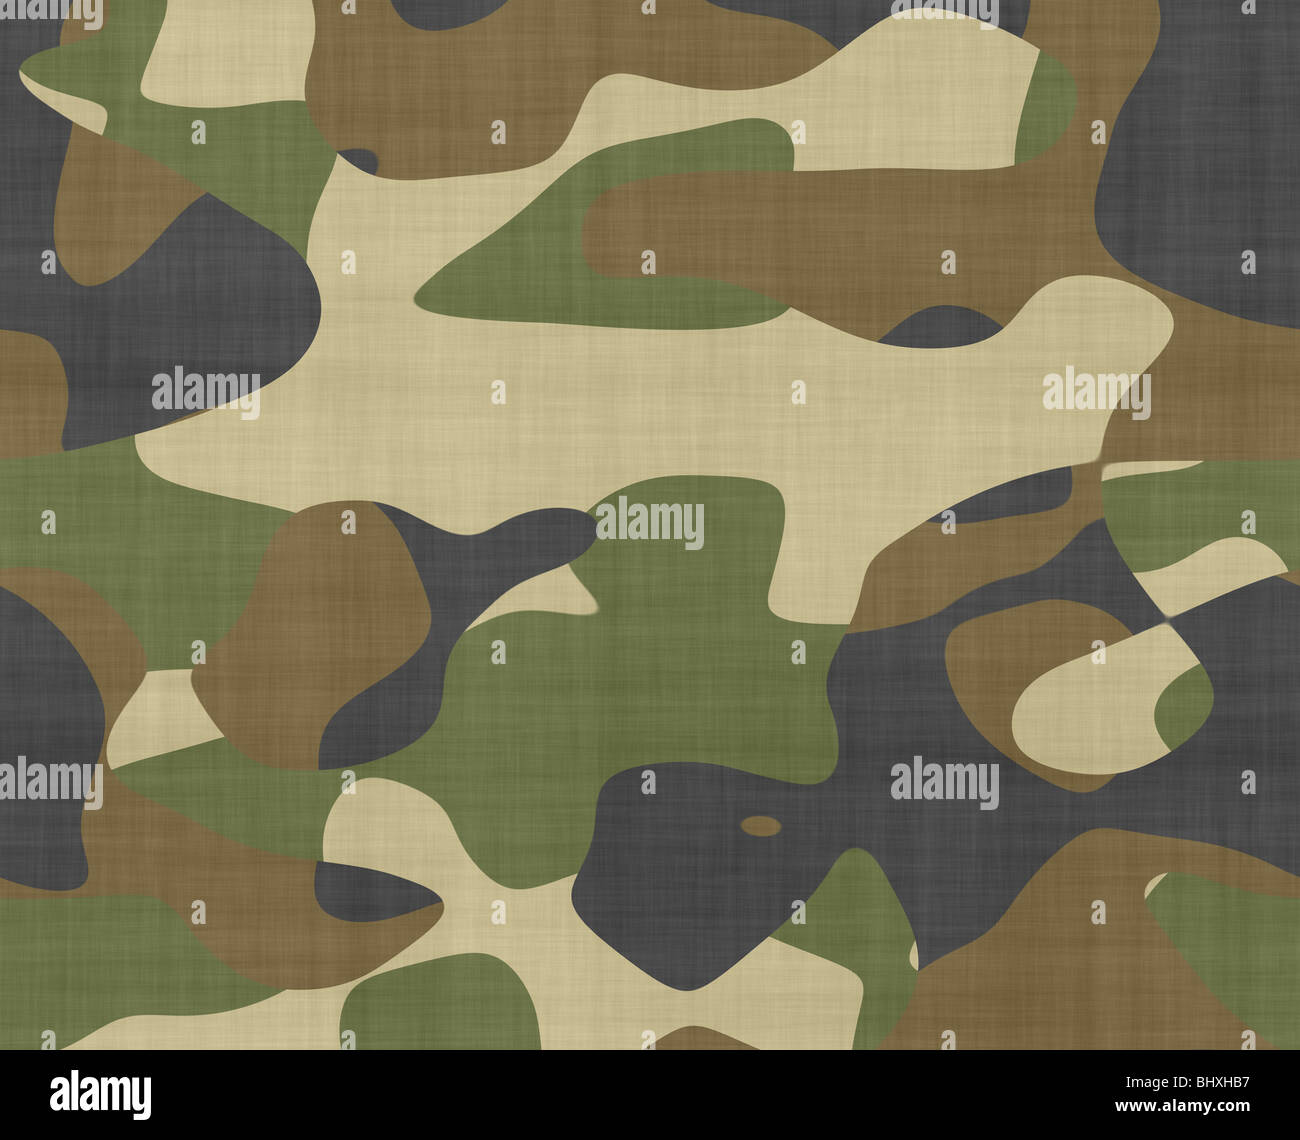 great image of camouflage fabric with space for text Stock Photo